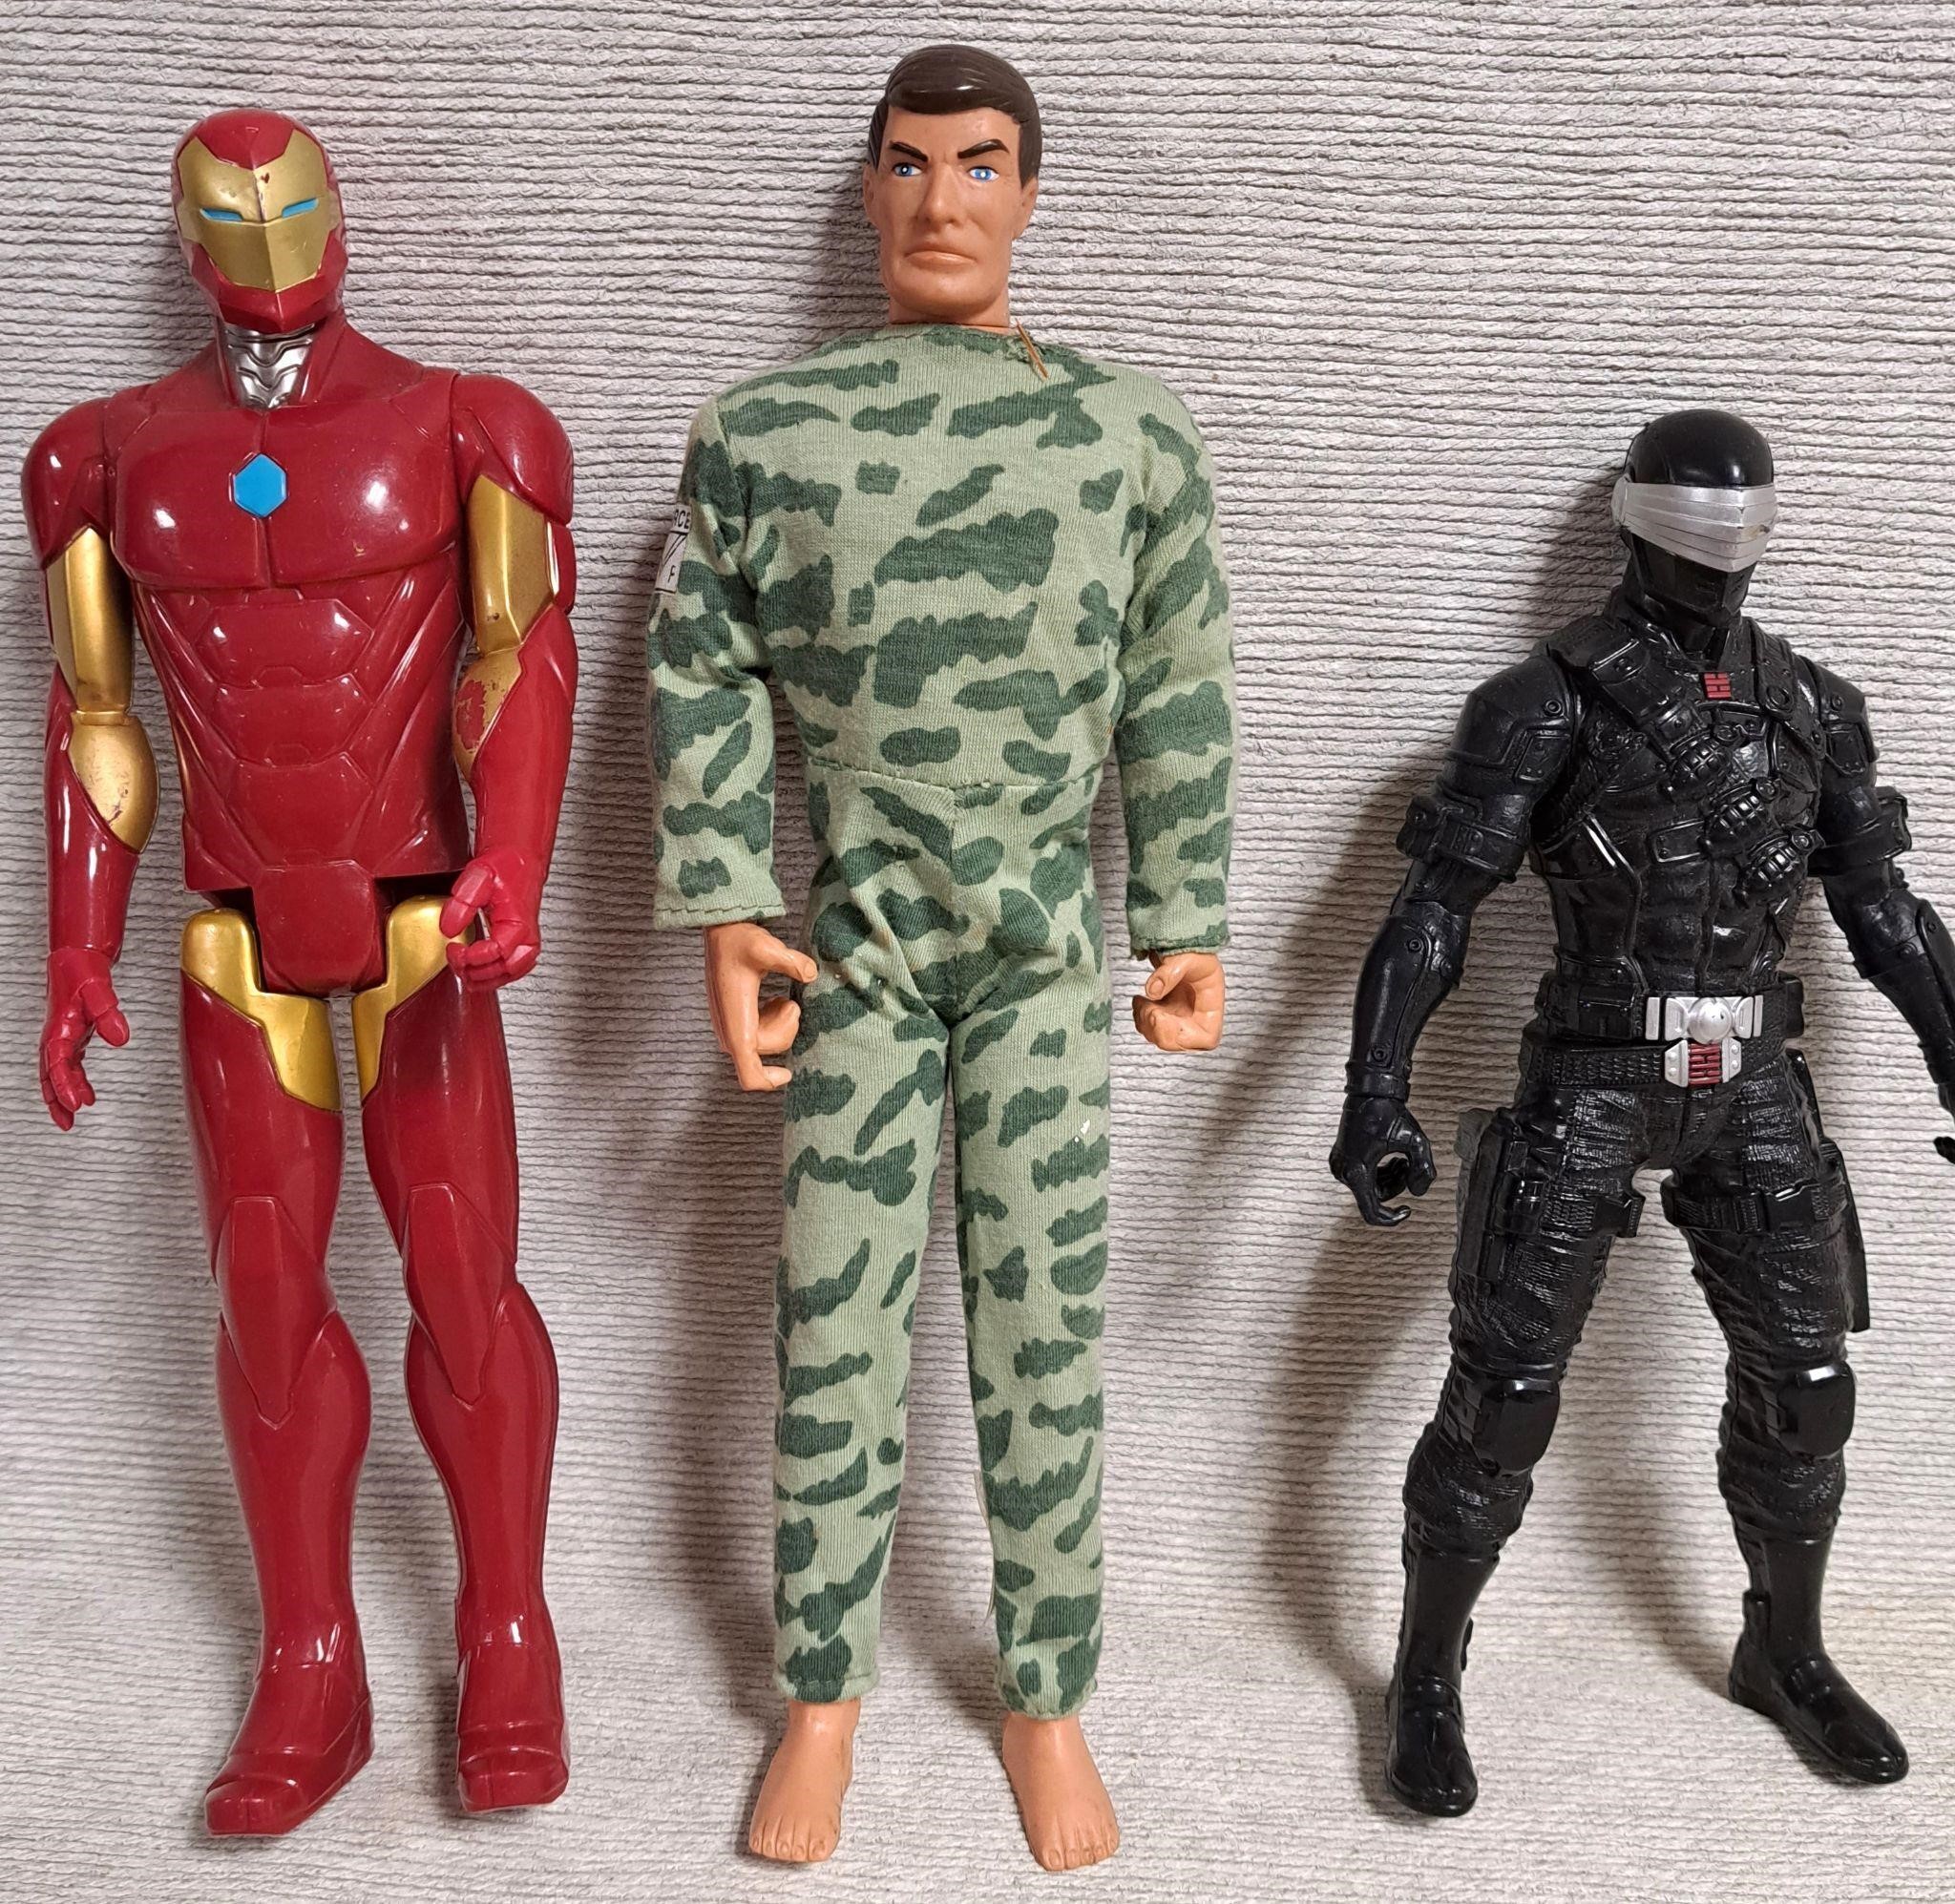 3 COMIC ACTION FIGURES 10-11" TALL